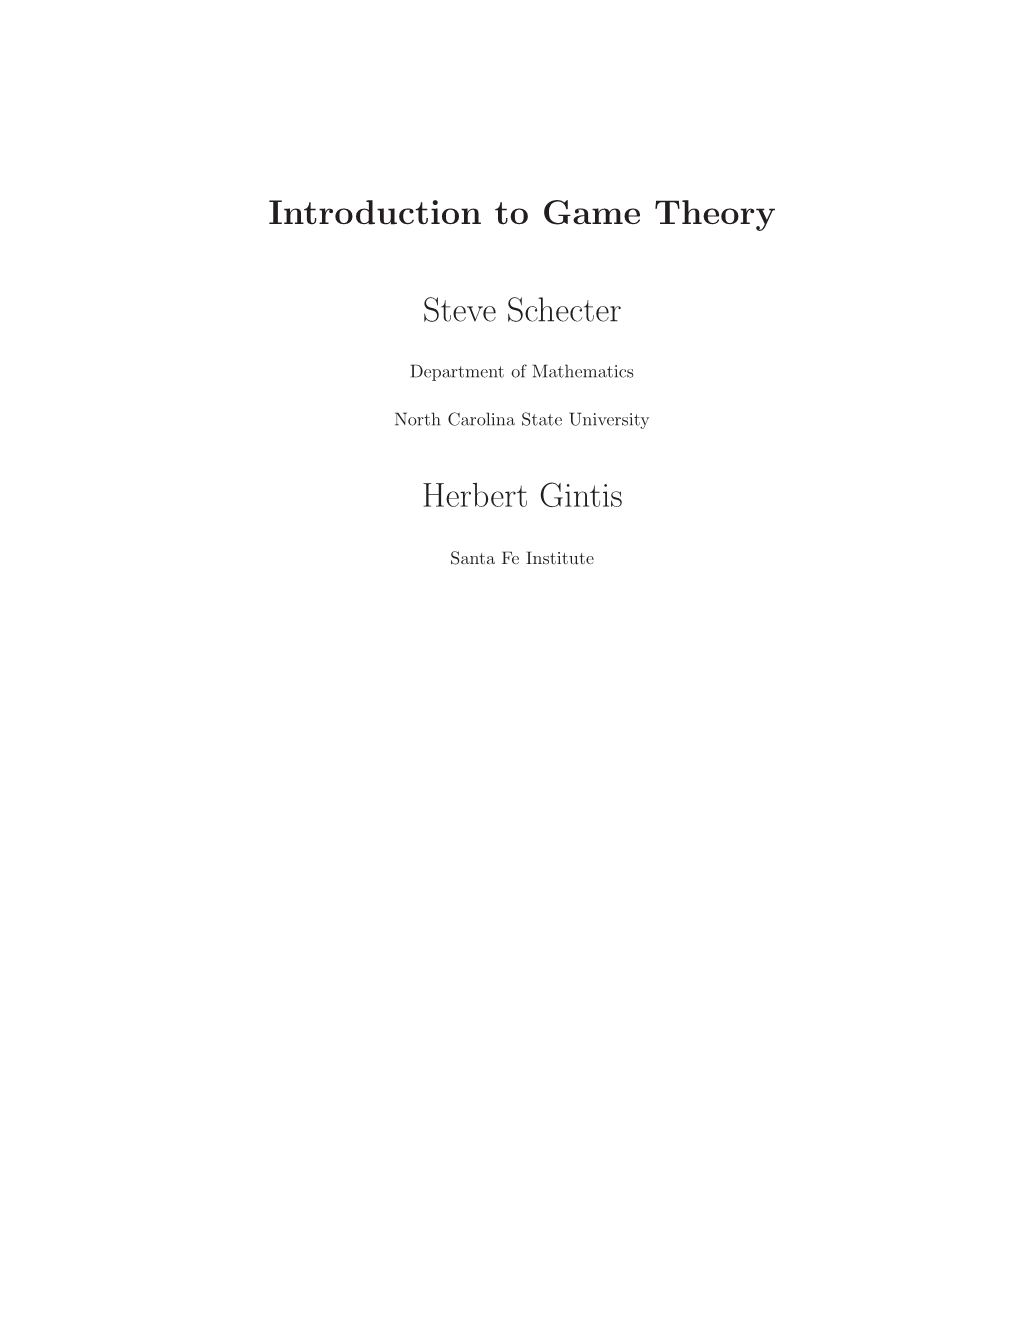 Introduction to Game Theory Steve Schecter Herbert Gintis